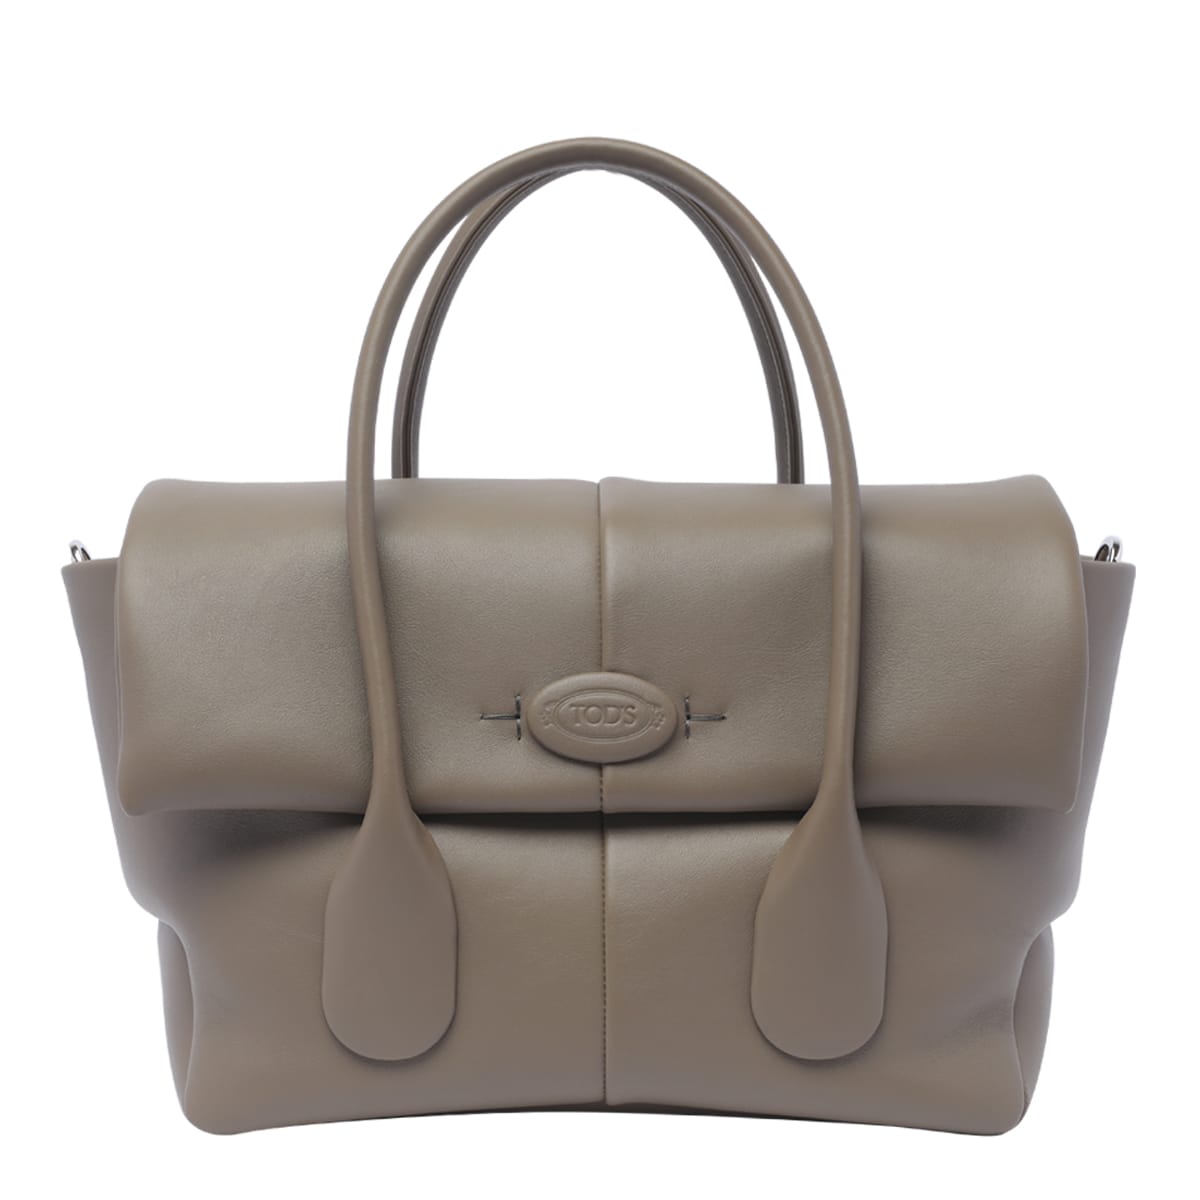 TOD'S DI BAG REVERSE LEATHER TODS BAG